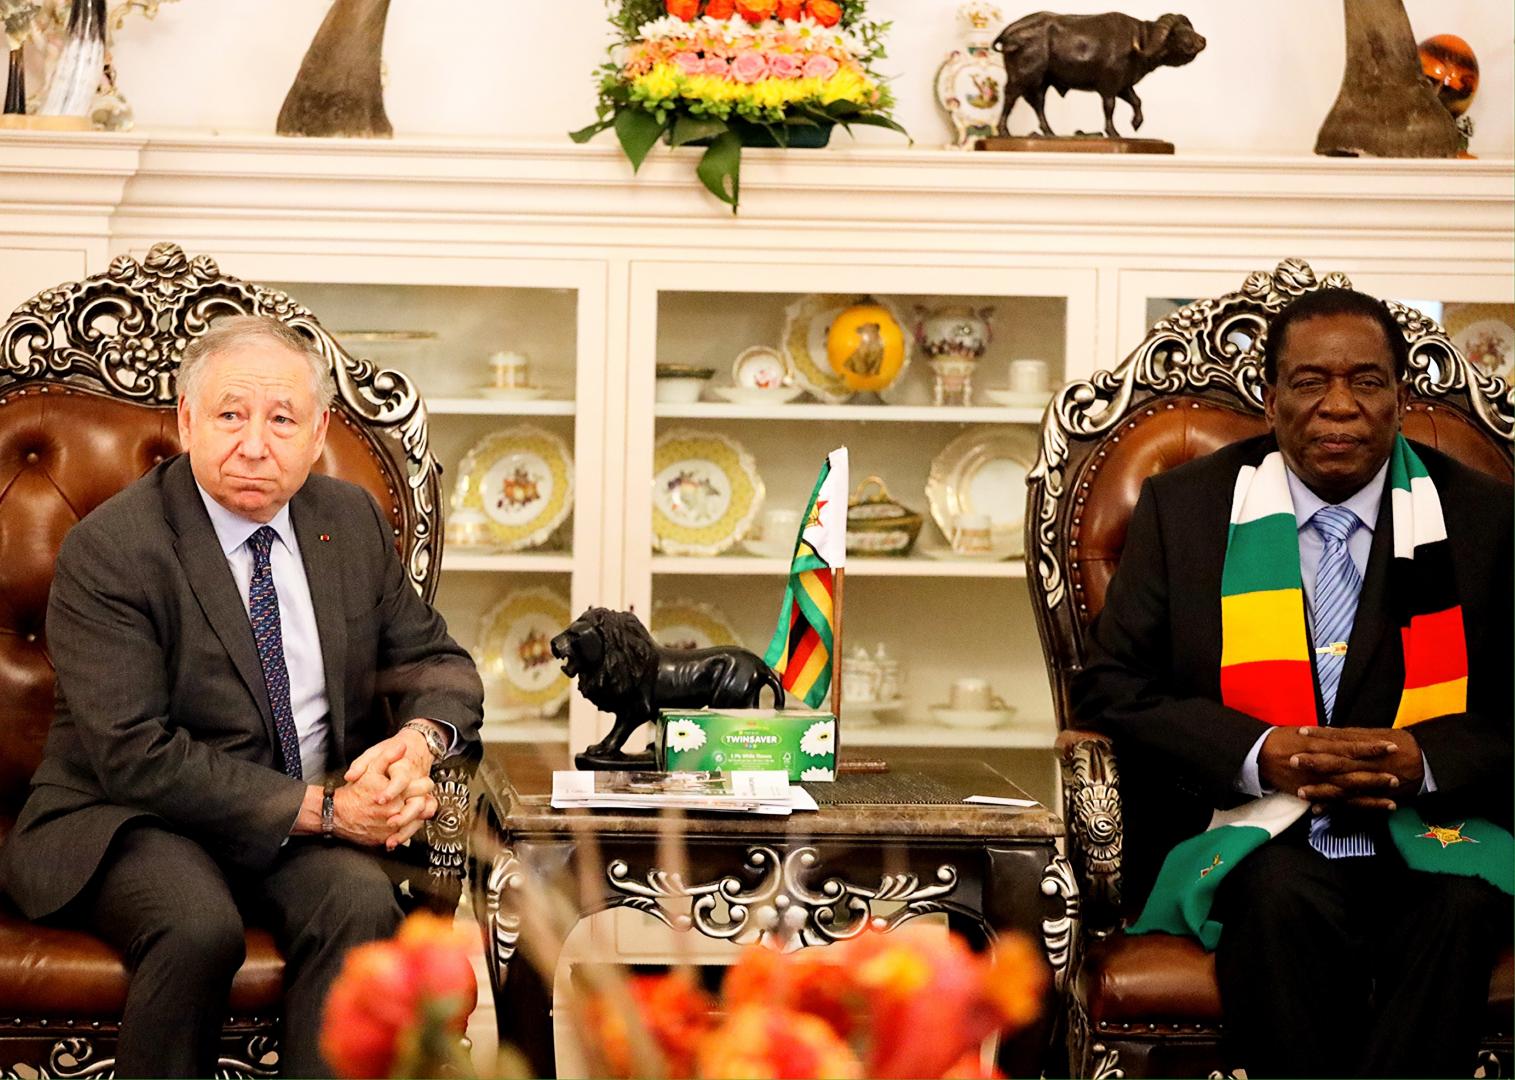 His Excellency President of Zimbabwe, Emmerson Mnangagwa and Jean Todt, the United Nations Secretary-General’s Special Envoy for Road Safety